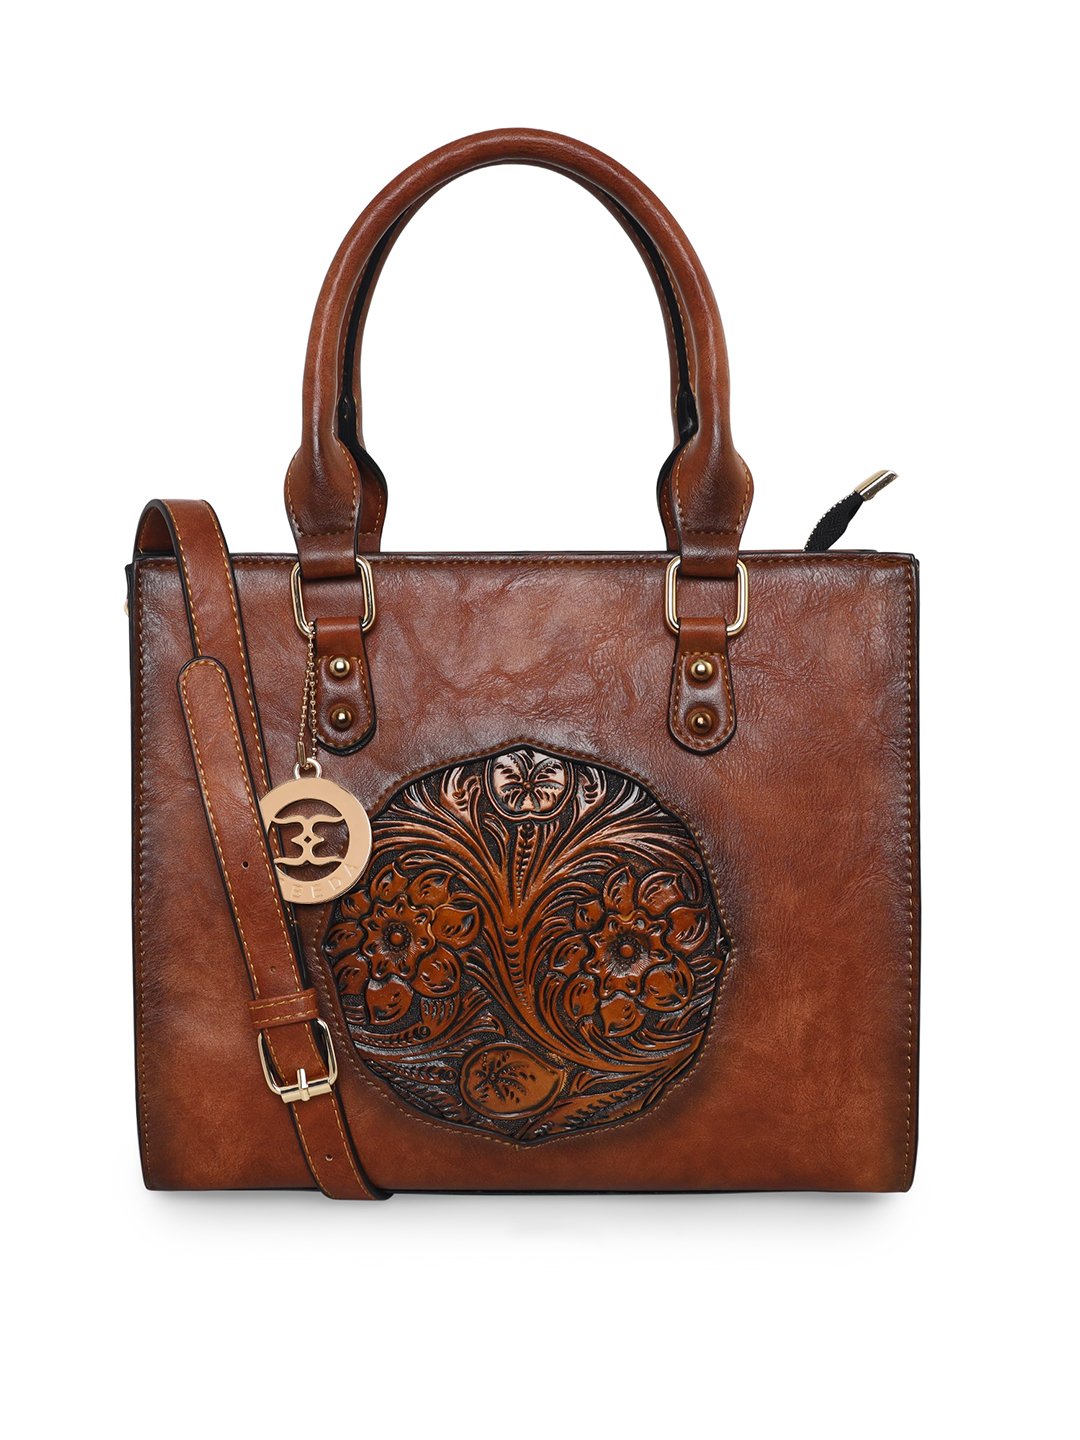 Trinity Ranch Leather Purse - NWT - general for sale - by owner - craigslist